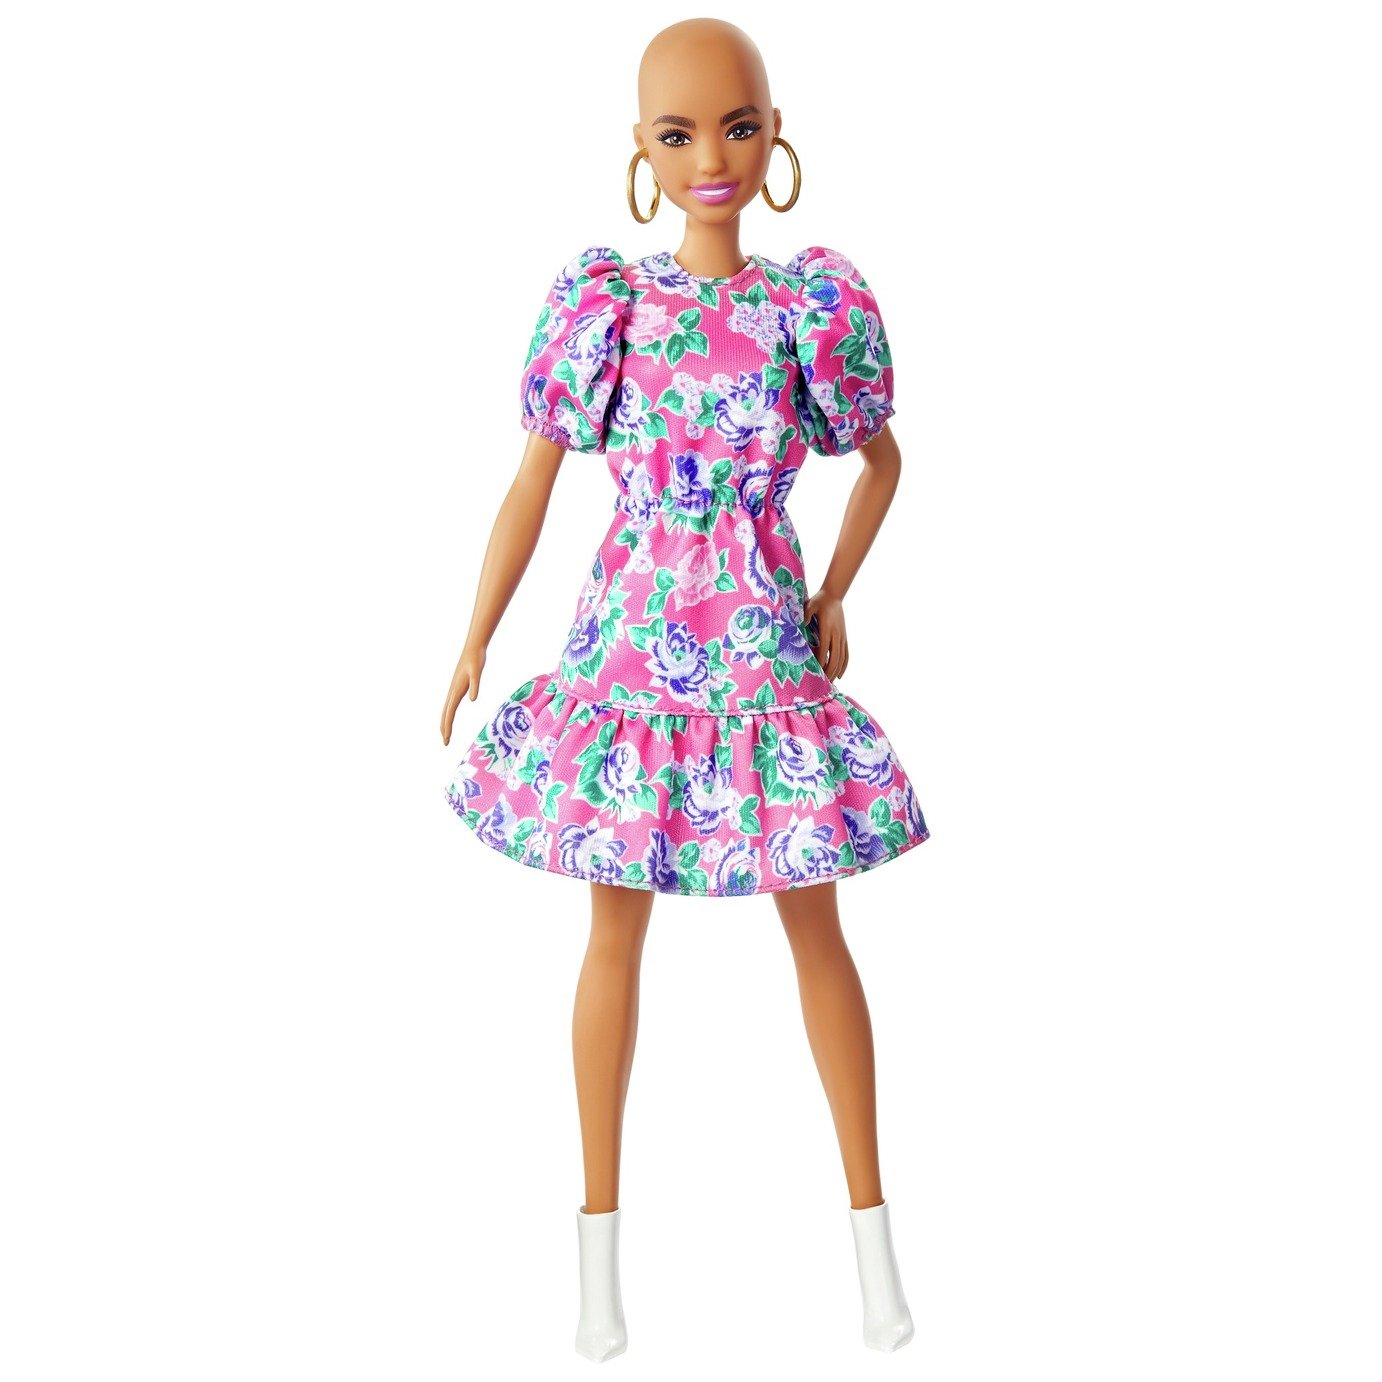 Barbie Fashionista Bald Doll Reviews - Updated June 2023